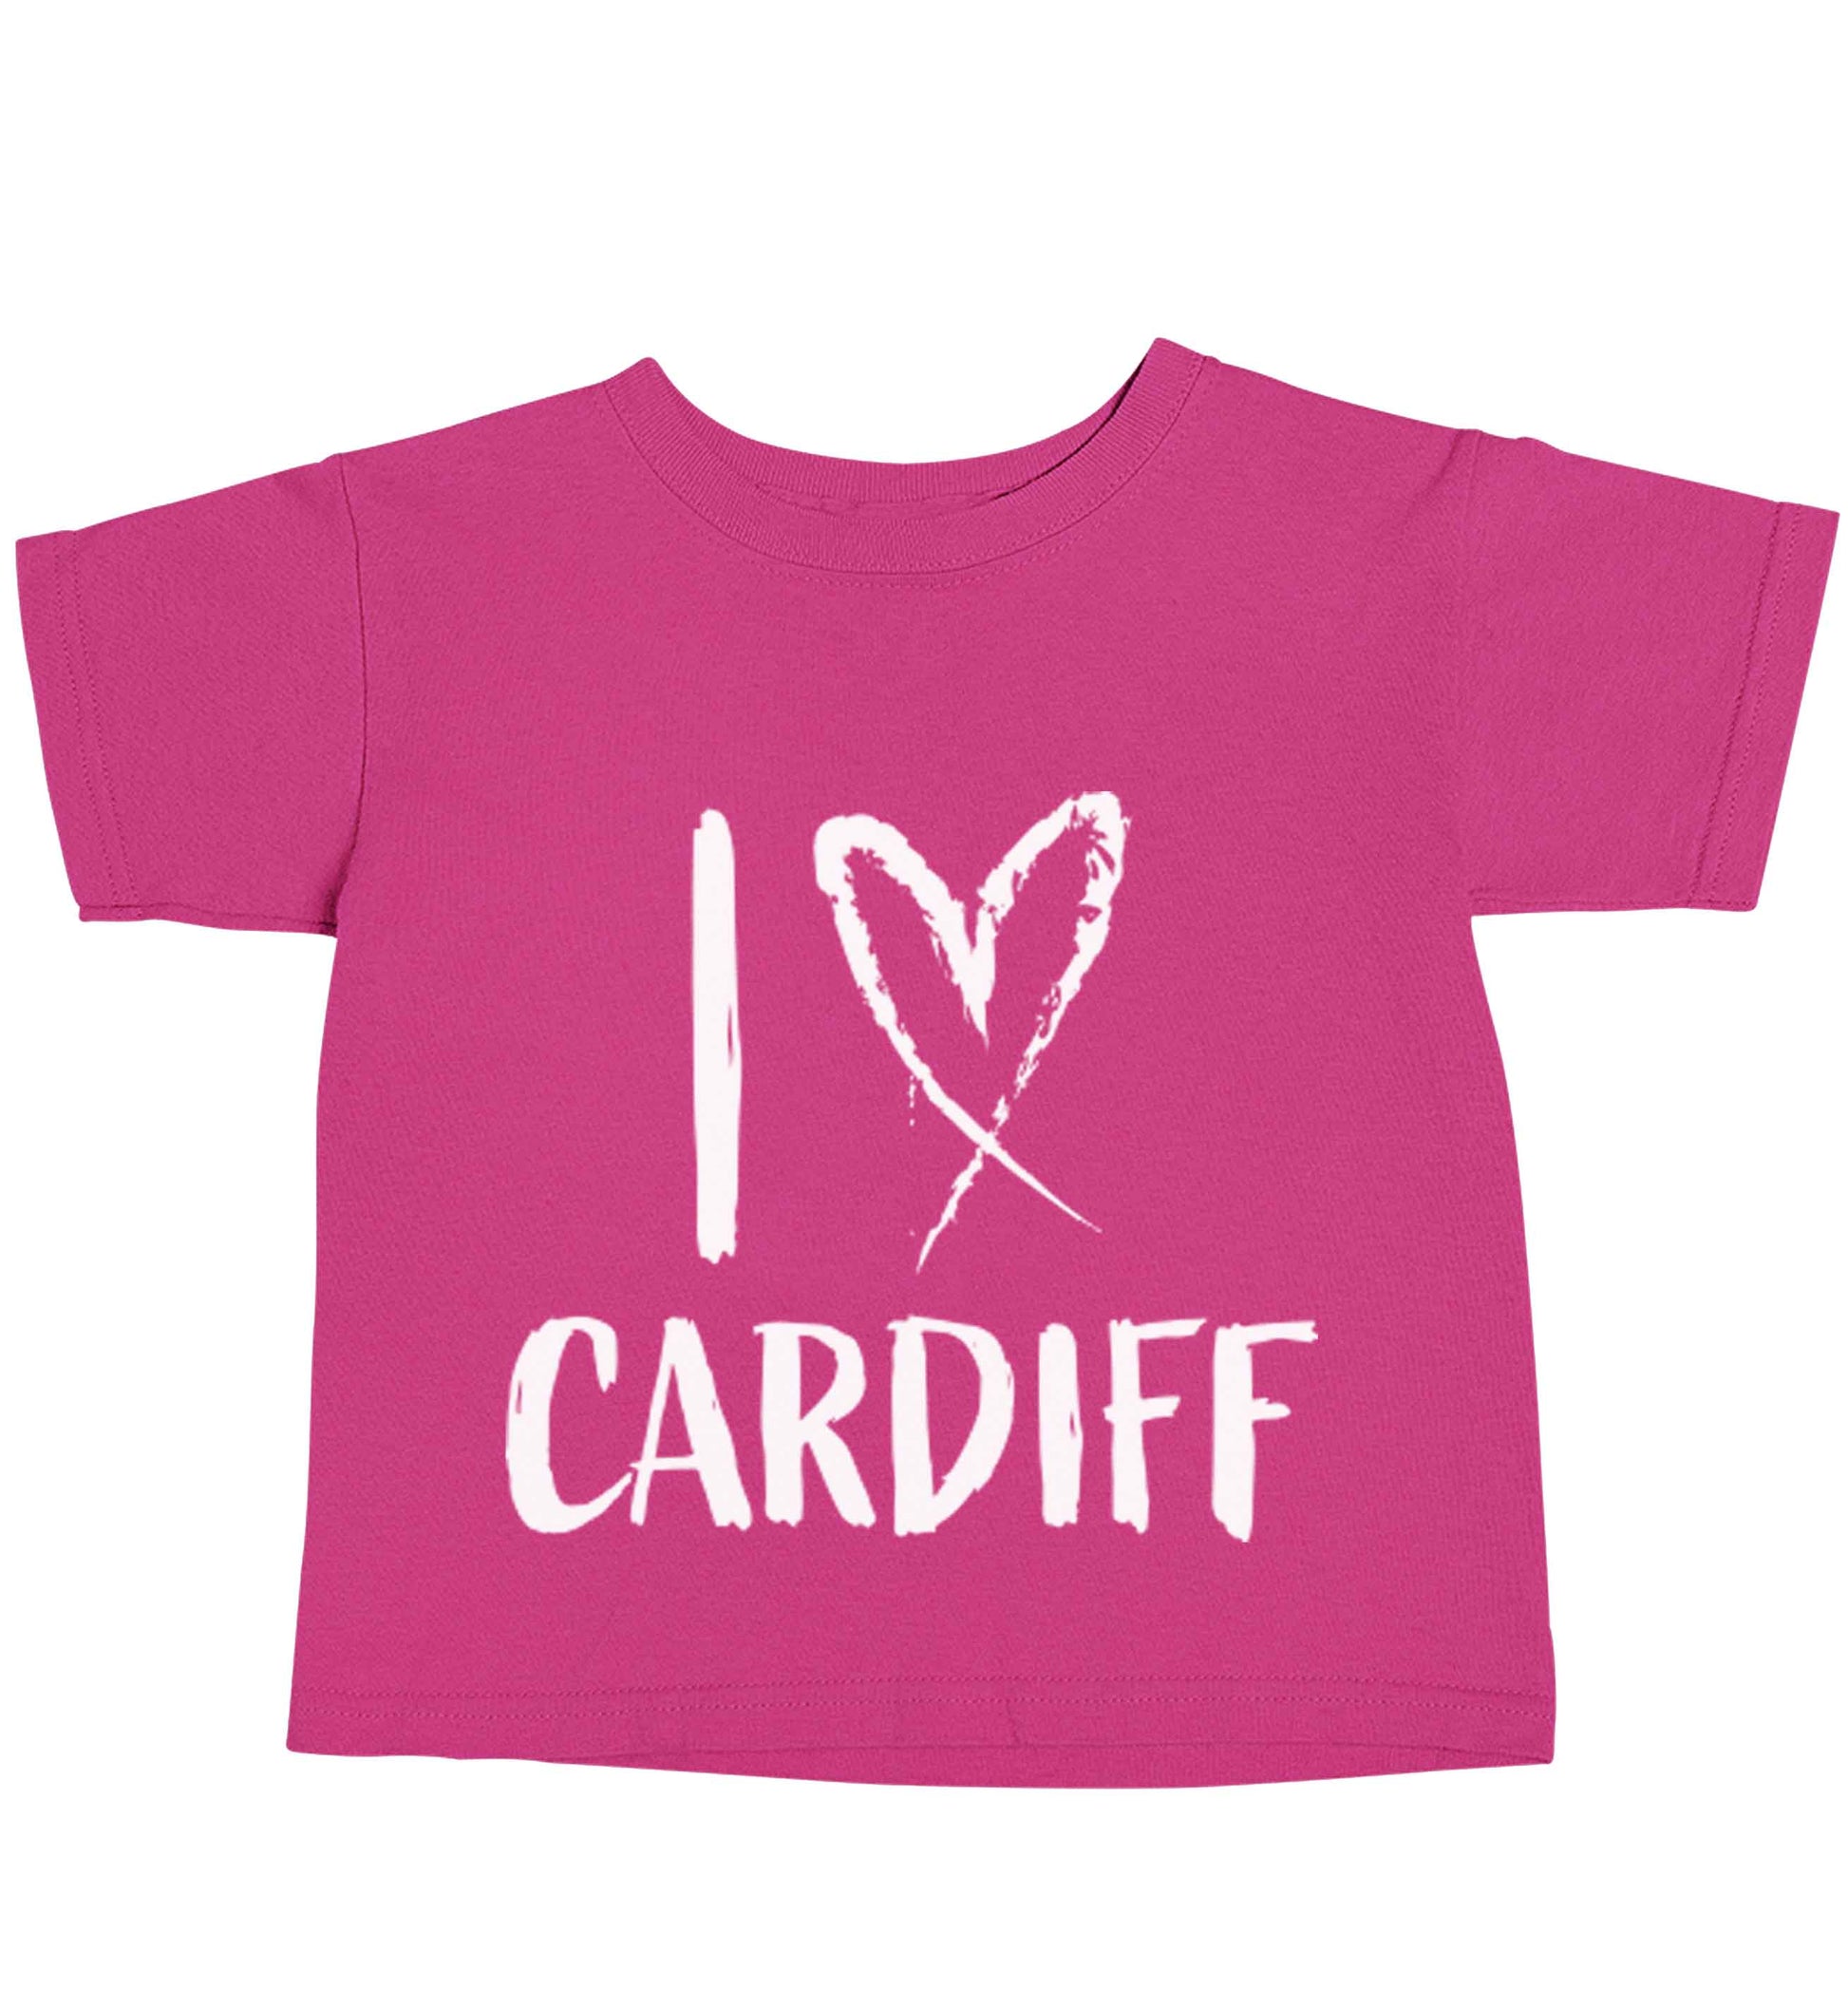 I love Cardiff pink baby toddler Tshirt 2 Years